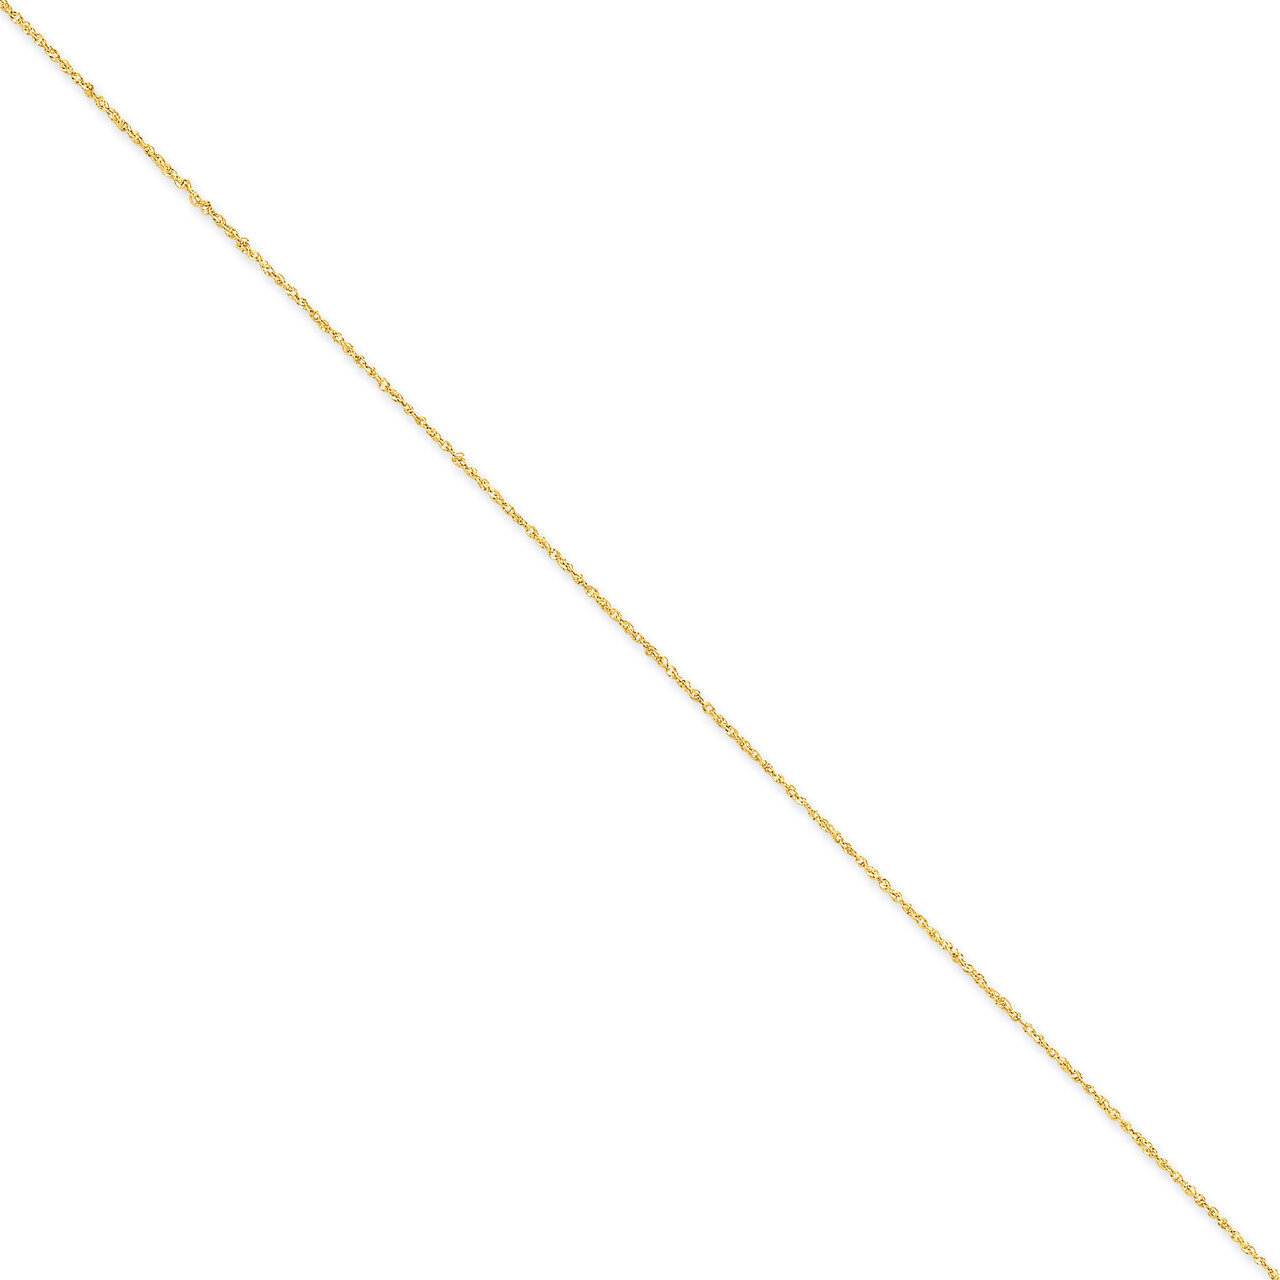 1.1mm Ropa Chain 16 Inch 14k Gold RPA020-16